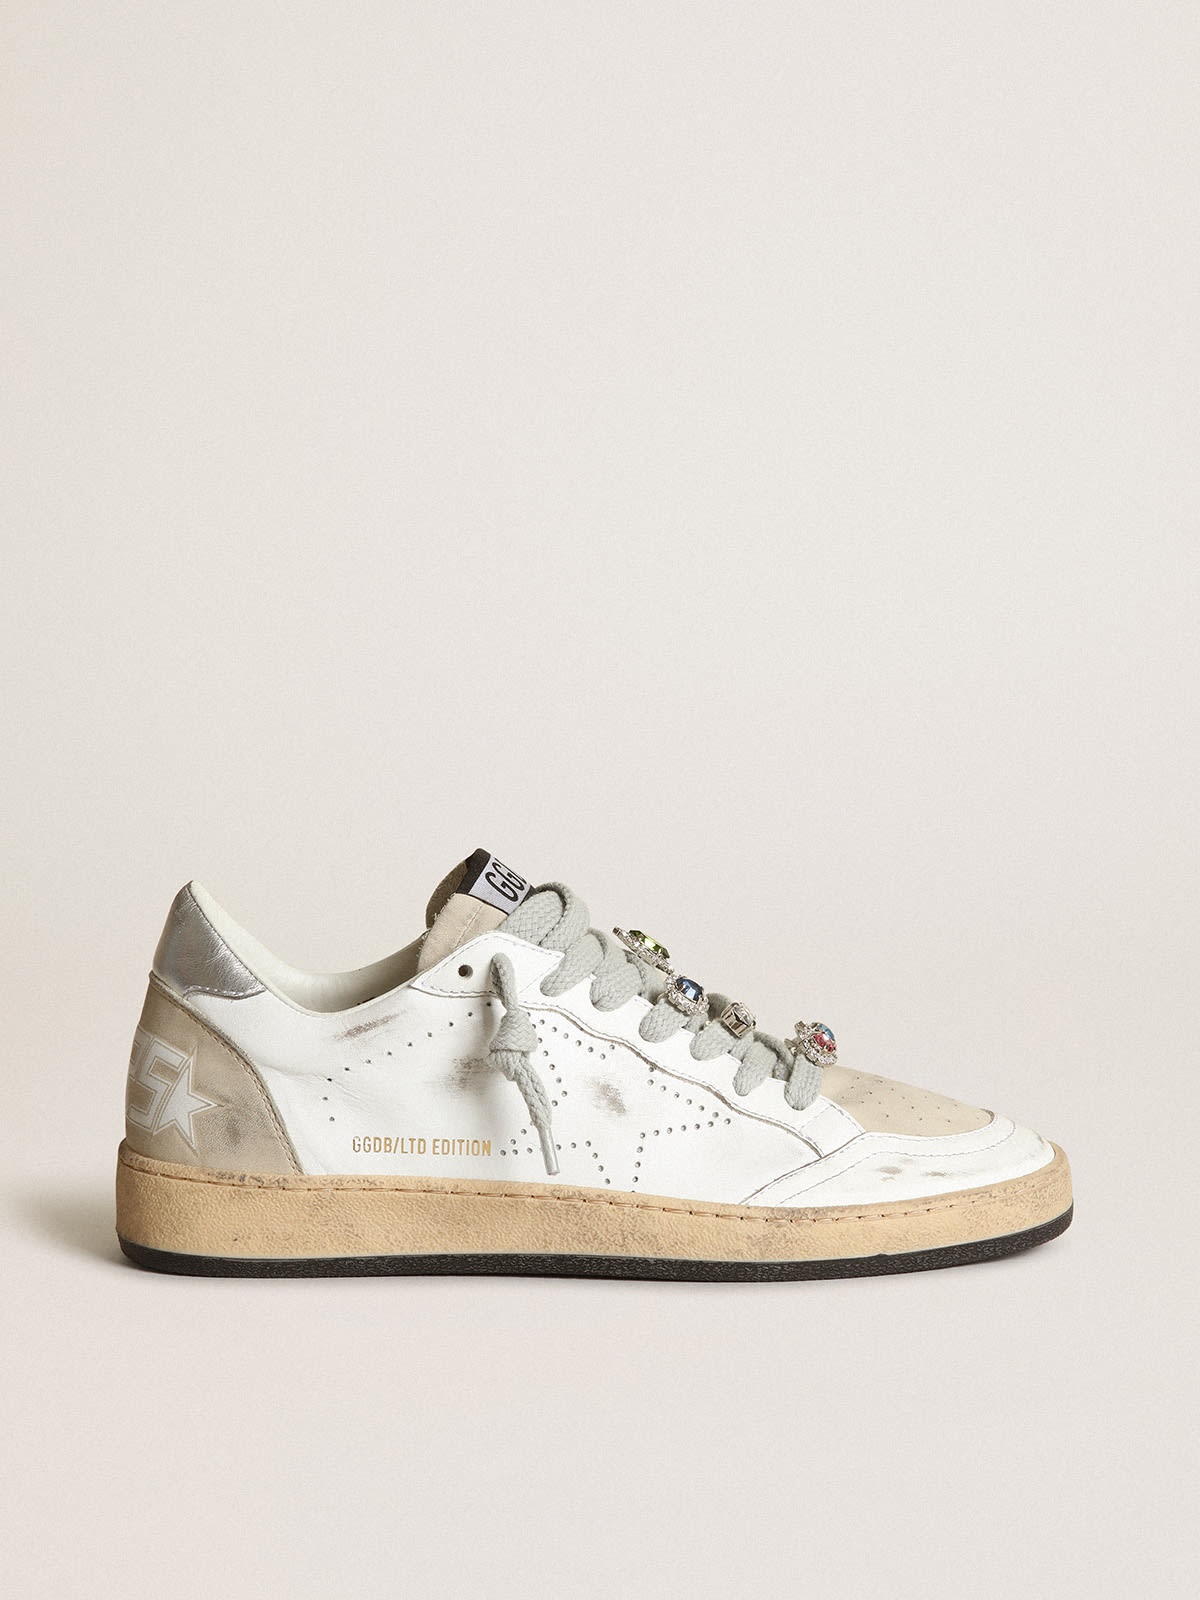 Ball Star LAB sneakers in white leather with perforated star and lace accessories with multicolored  - 1